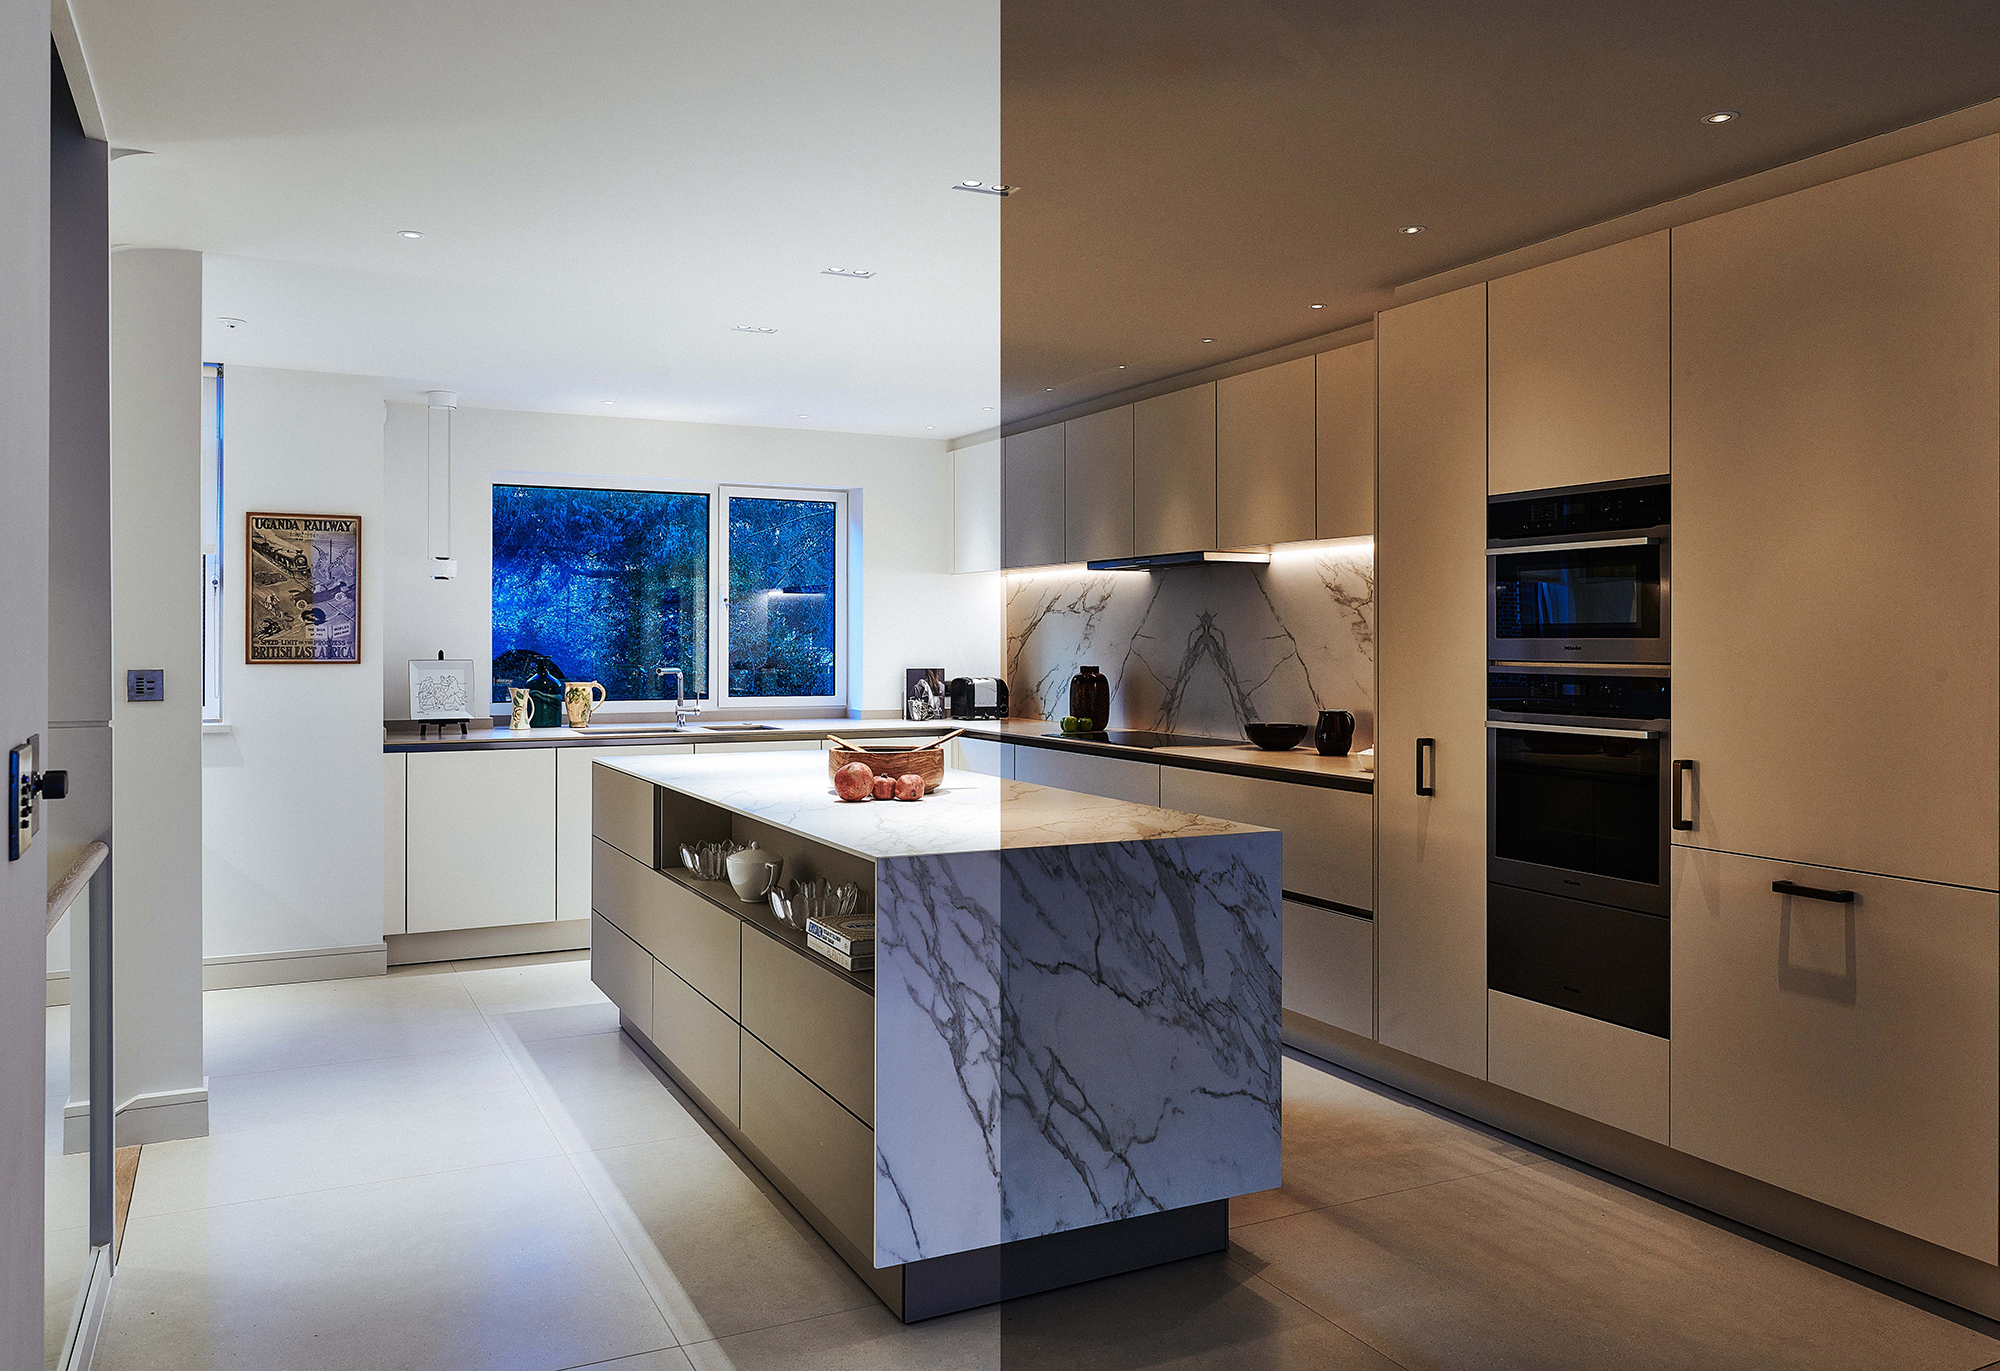 daylight or warm light for kitchen